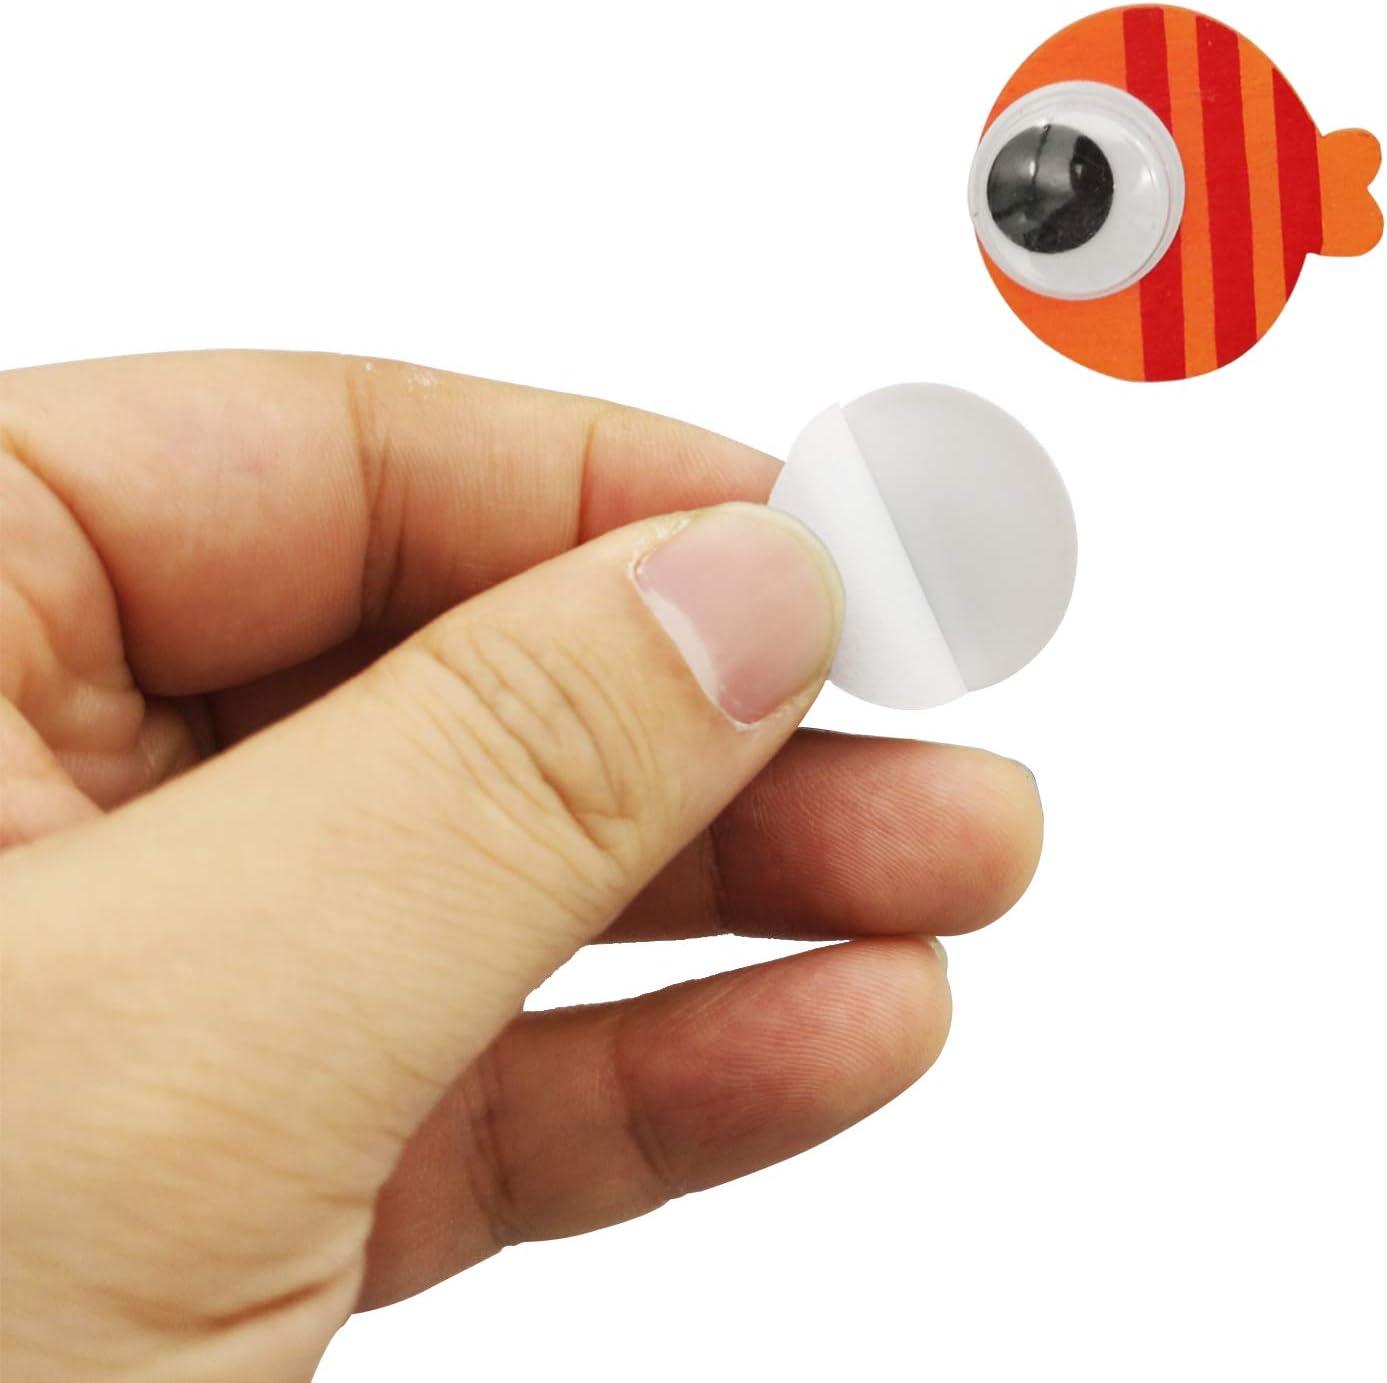 200pcs 25mm/1 inch Wiggle Googly Eyes with Self-Adhesive Round Black &  White Eyes for DIY Arts Craft Supplies Party Decorations